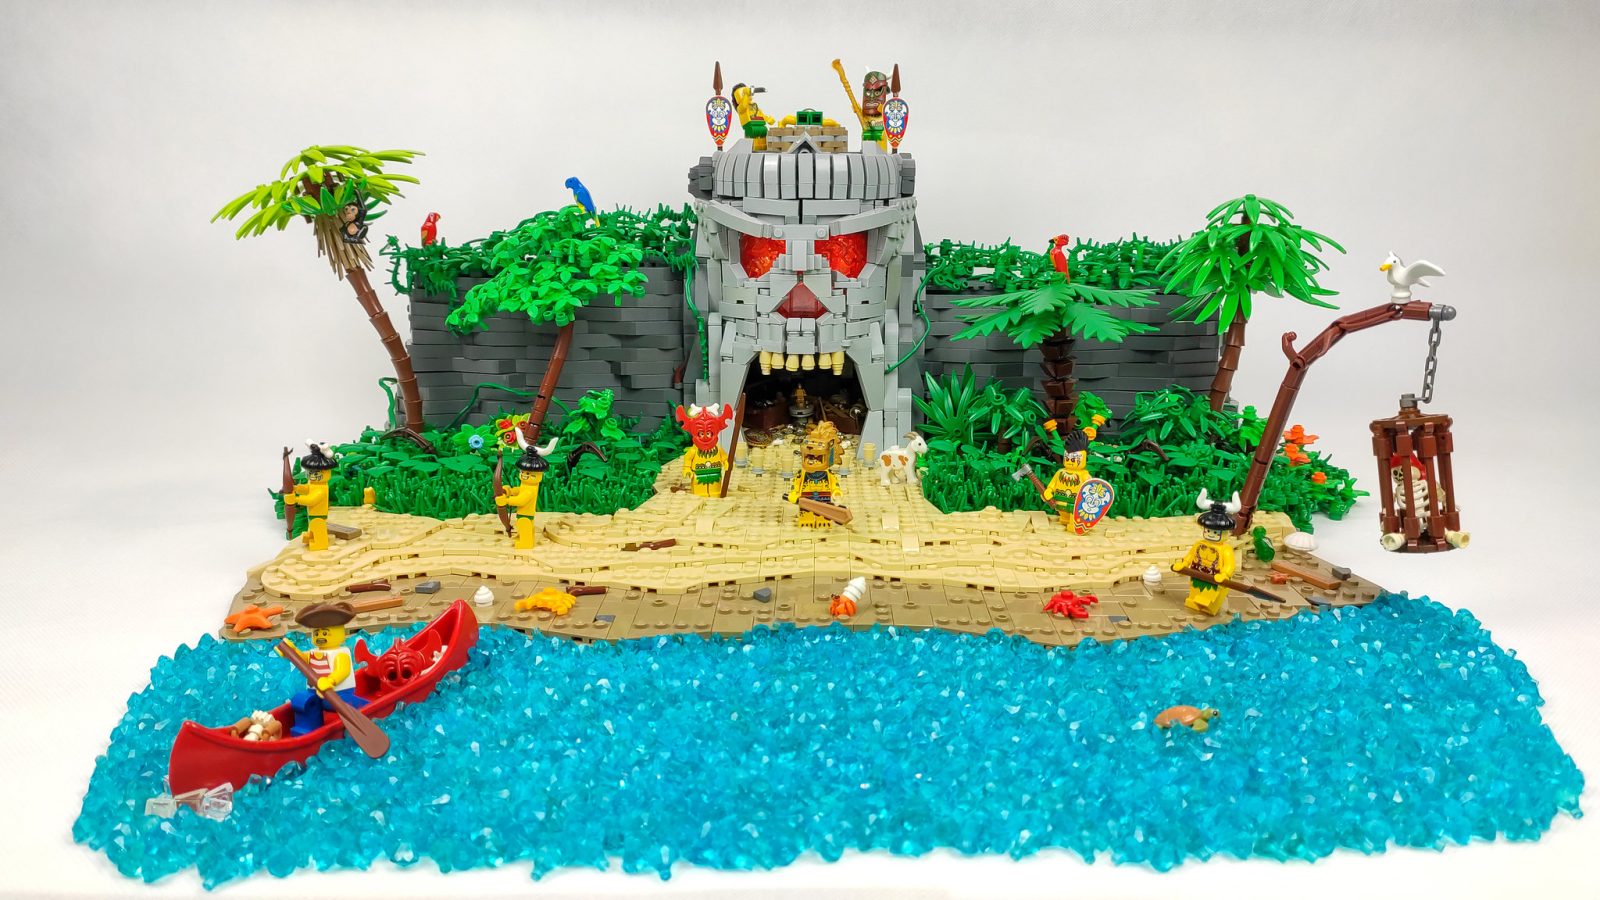 Featured Image for “Return to Forbidden Island” by Cube Brick